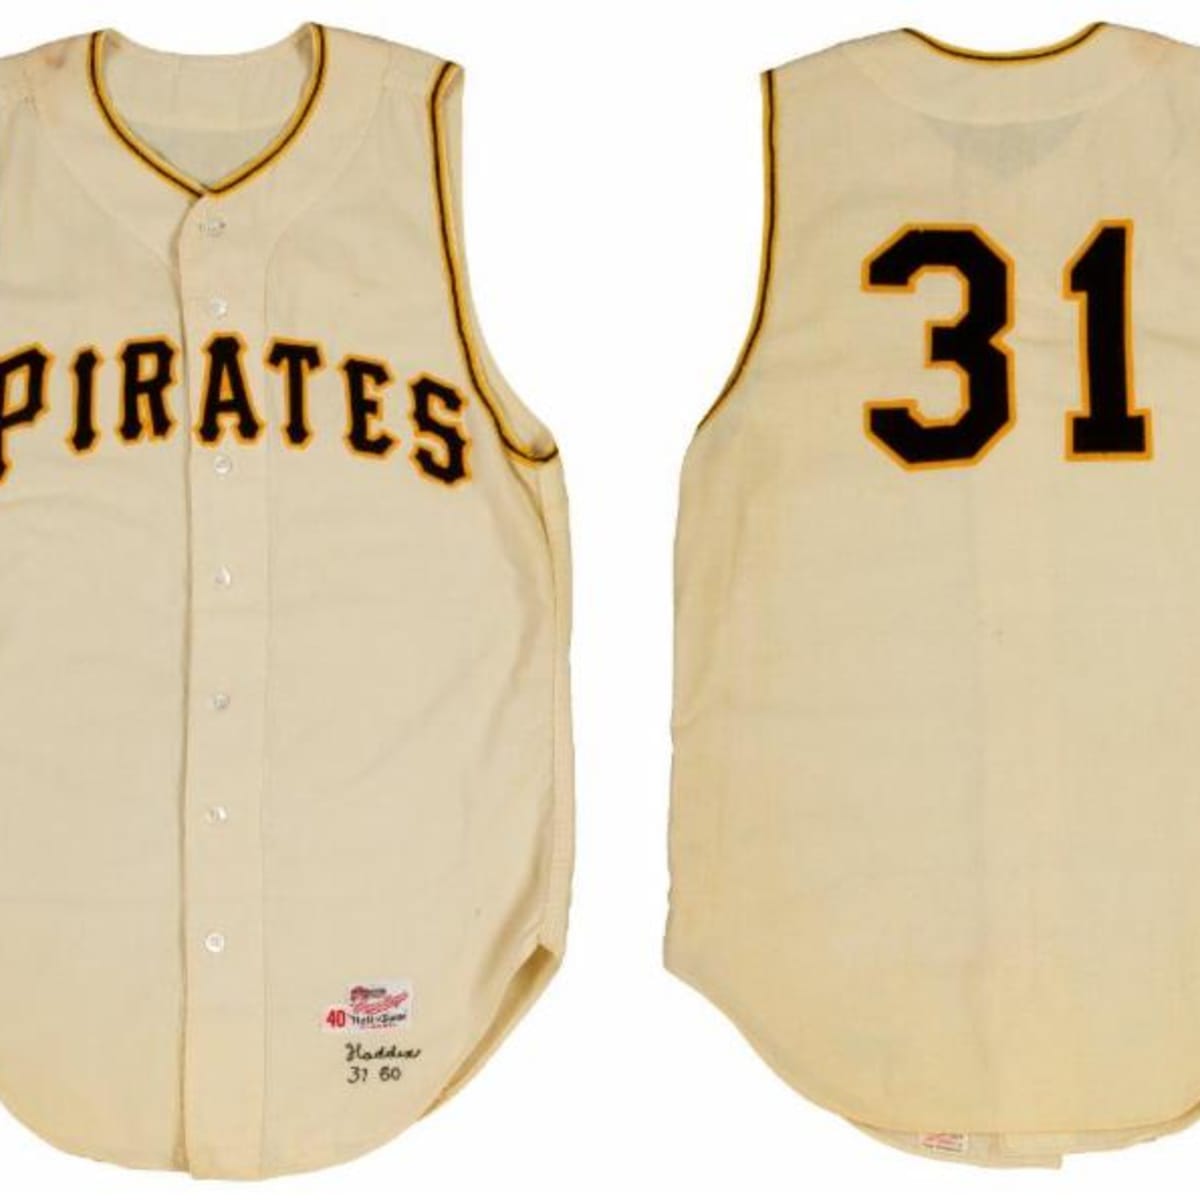 Harvey Haddix Collection at Goldin Auctions, Including 1960 GU Jersey